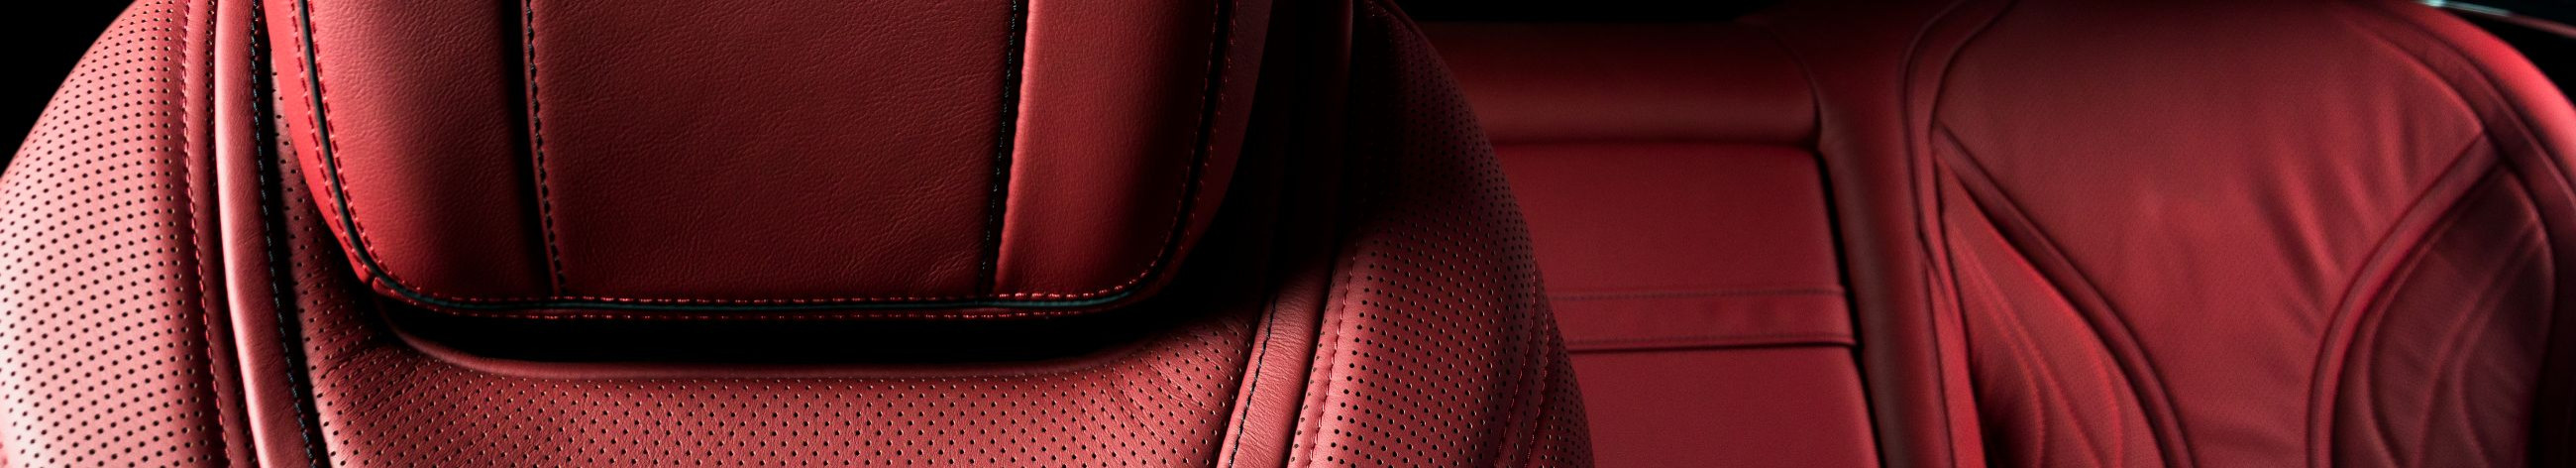 We specialize in the renewal and restoration of vehicle interiors and soft furnishings, offering a range of services from leather seat repair to custom upholstery design, ensuring every detail is tailored to perfection.